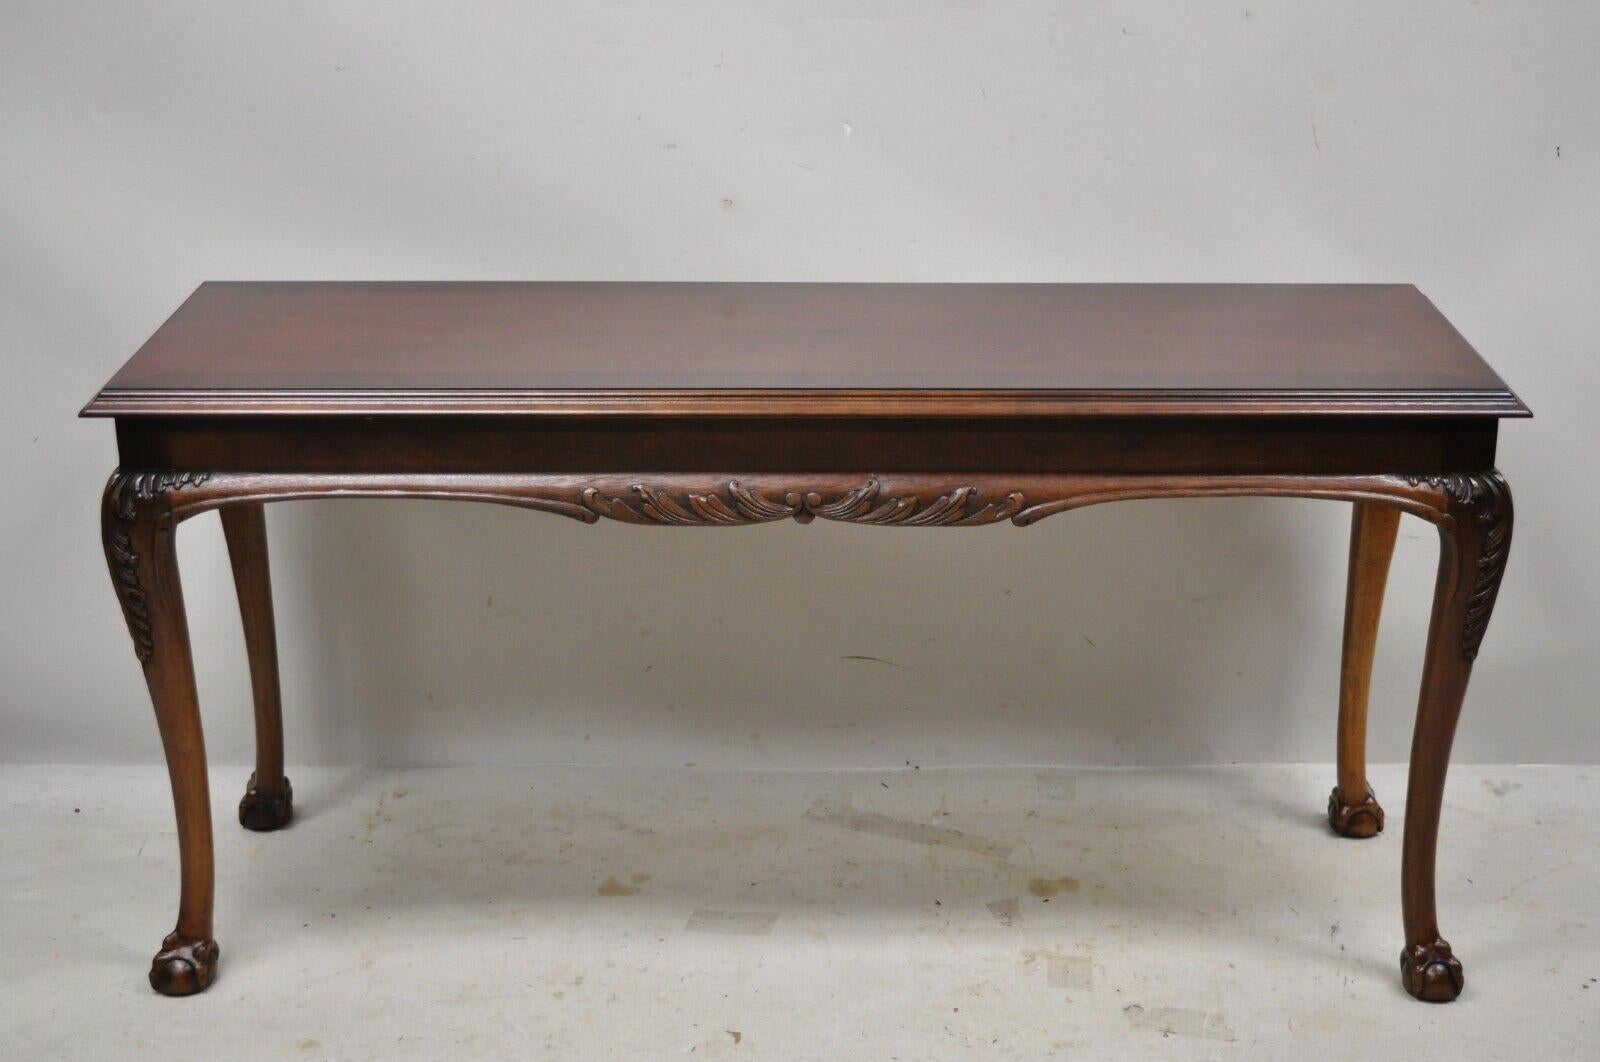 Lane Chinese Chippendale Georgian style mahogany ball and claw console sofa hall table. Item features solid wood construction, beautiful wood grain, carved ball and claw feet, banded top, quality American craftsmanship, great style and form.